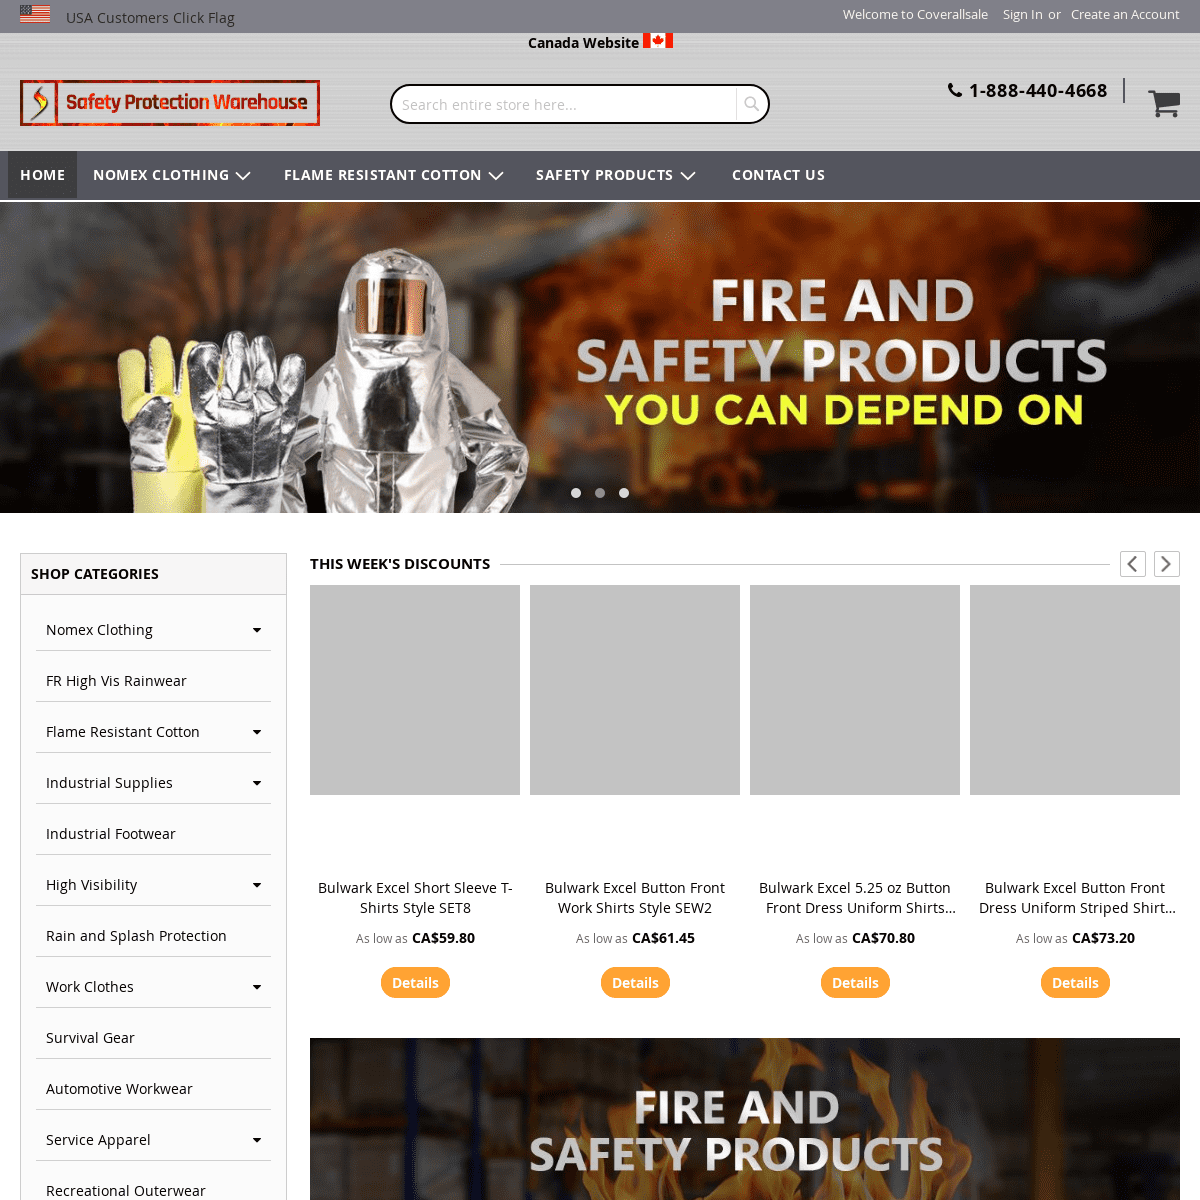 Safety Protection Warehouse Canada